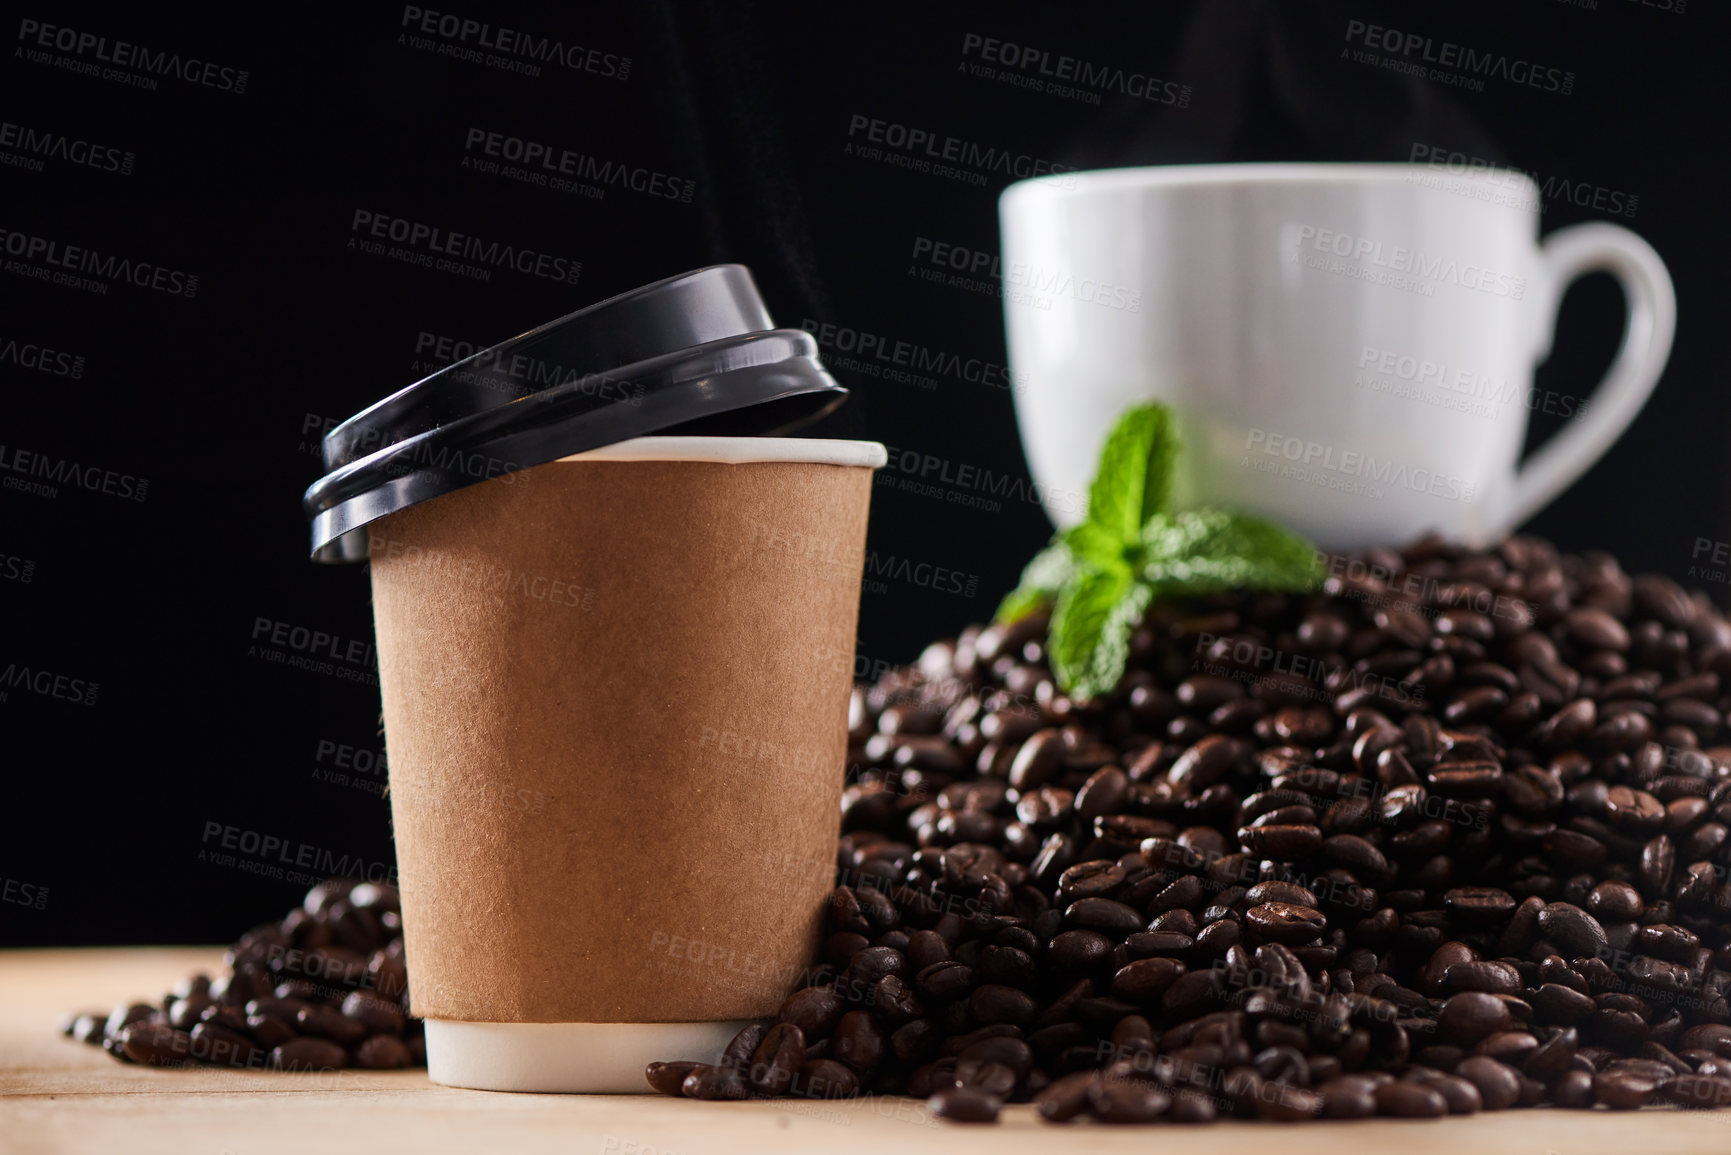 Buy stock photo Closeup shot of a paper cup on a surface, with a teacup and mint leaf resting on a pile of coffee beans in the background